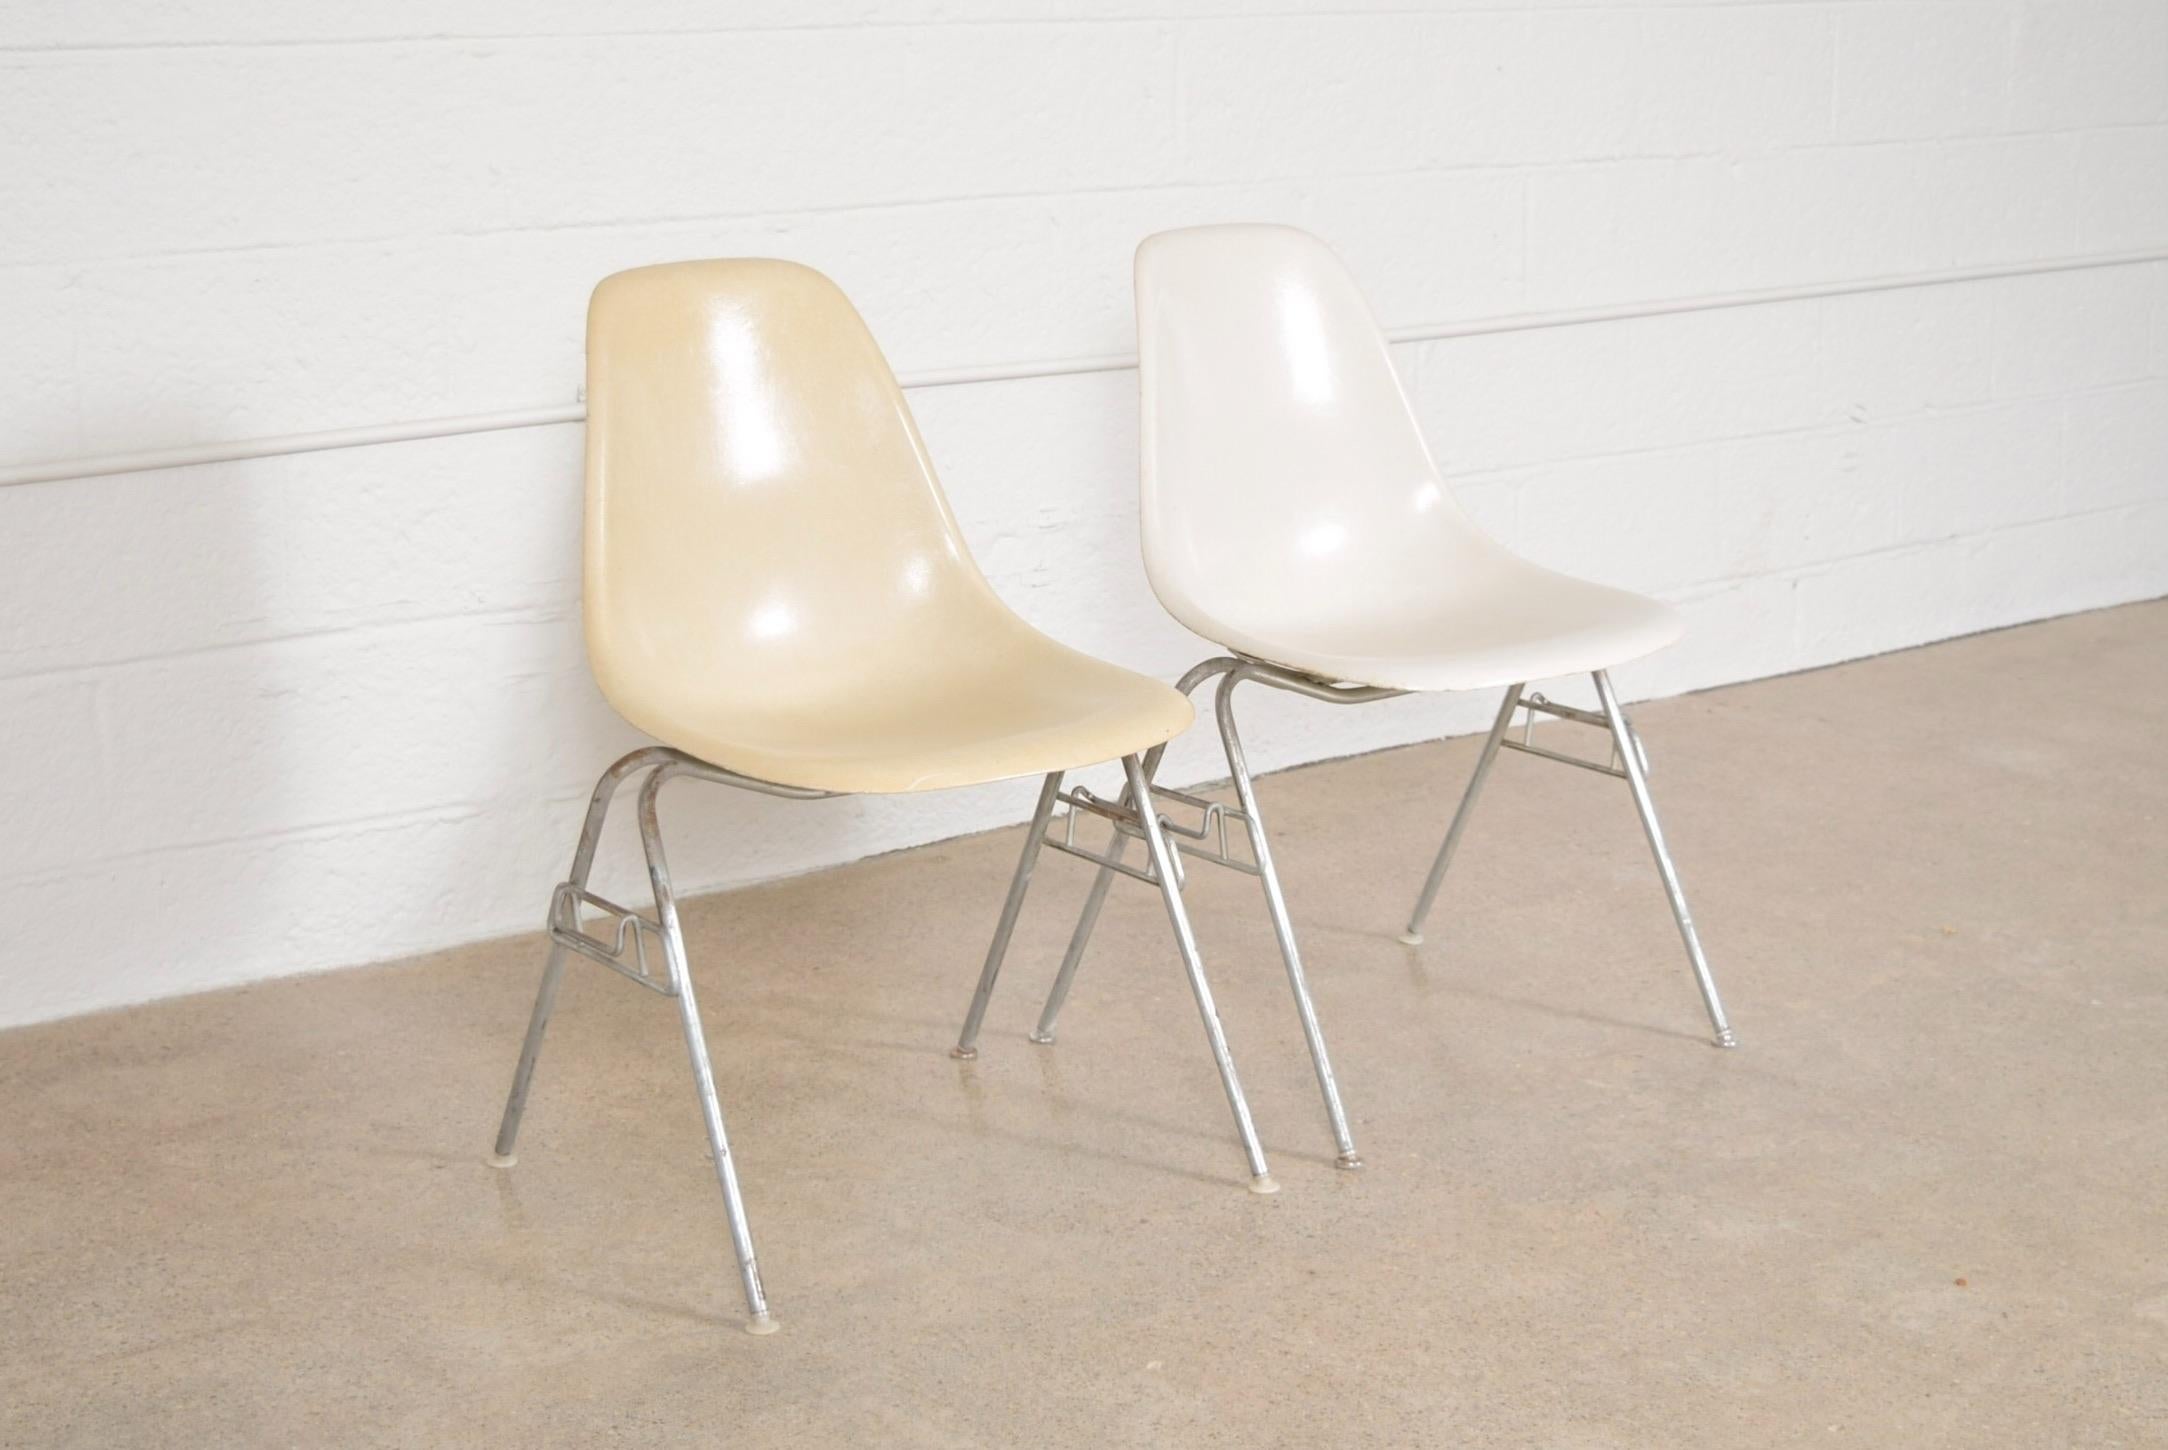 • Original Eames Herman Miller DSS fiberglass shell chairs circa 1960. One bone and one white chair.
• Iconic design with fiberglass shell on stackable steel base.
• Comfortable contoured ergonomic design.
• Herman Miller embossed stamp on